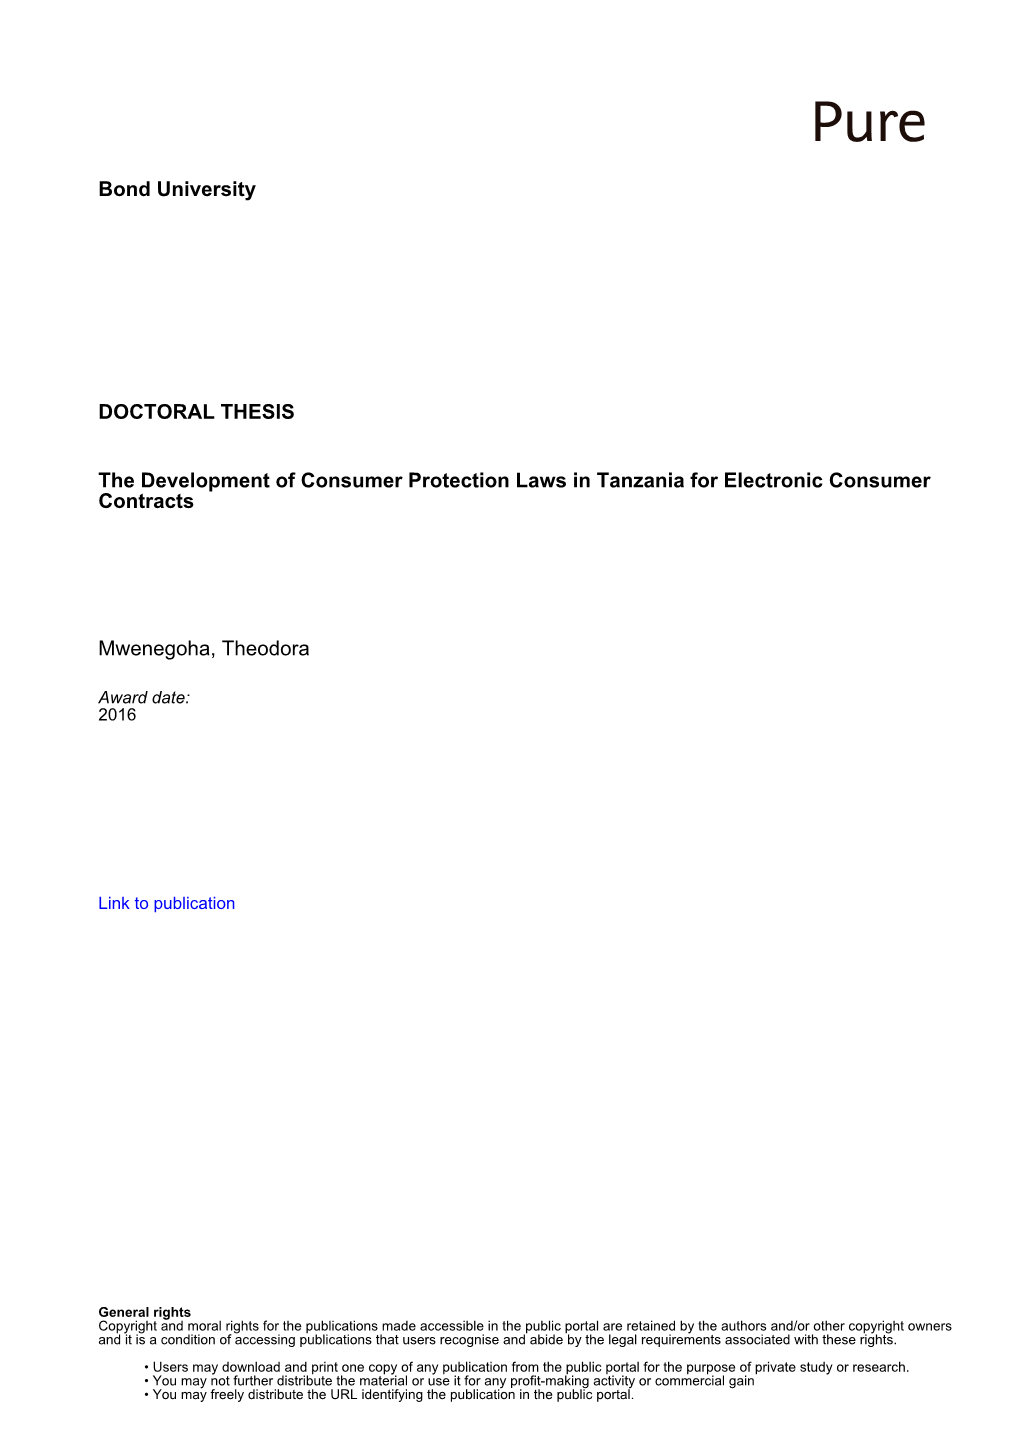 The Development of Consumer Protection Laws in Tanzania for Electronic Consumer Contracts